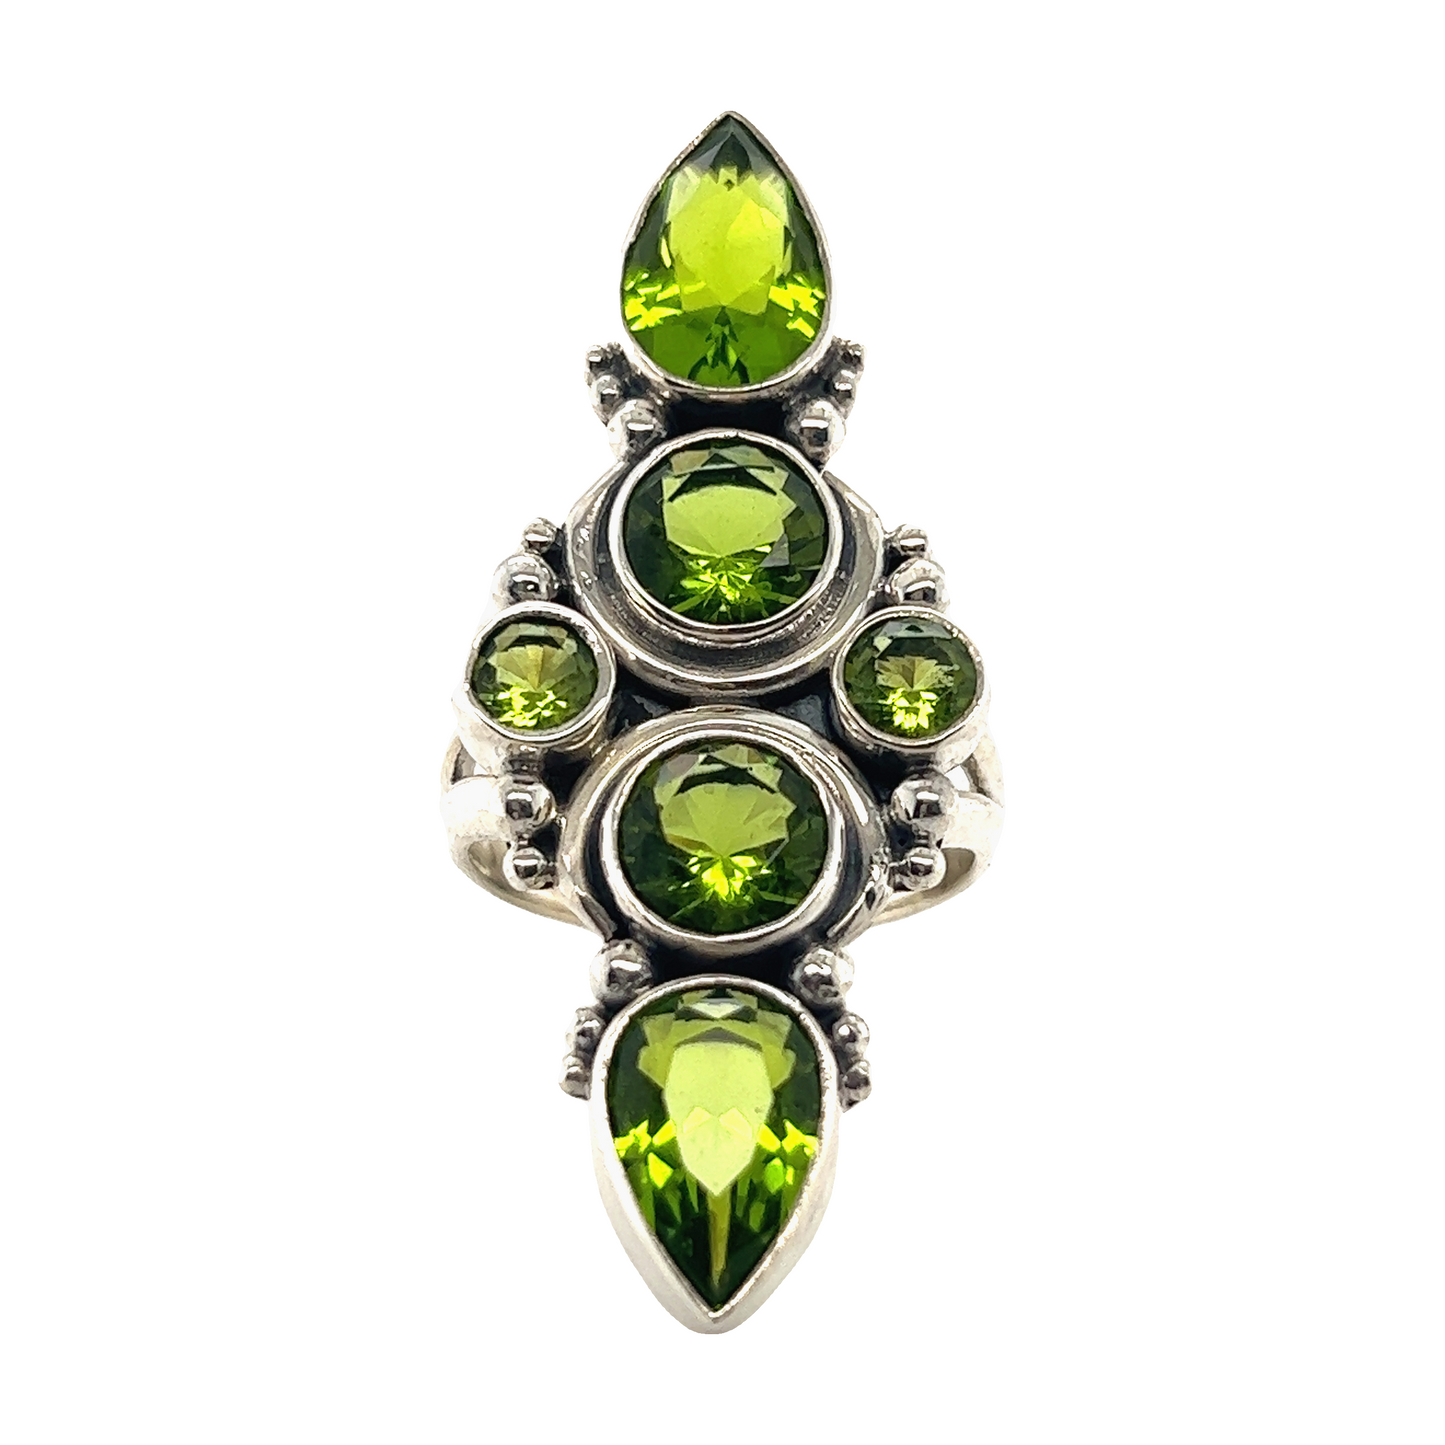 An Exquisite Peridot Statement Ring from Super Silver with green peridot stones.